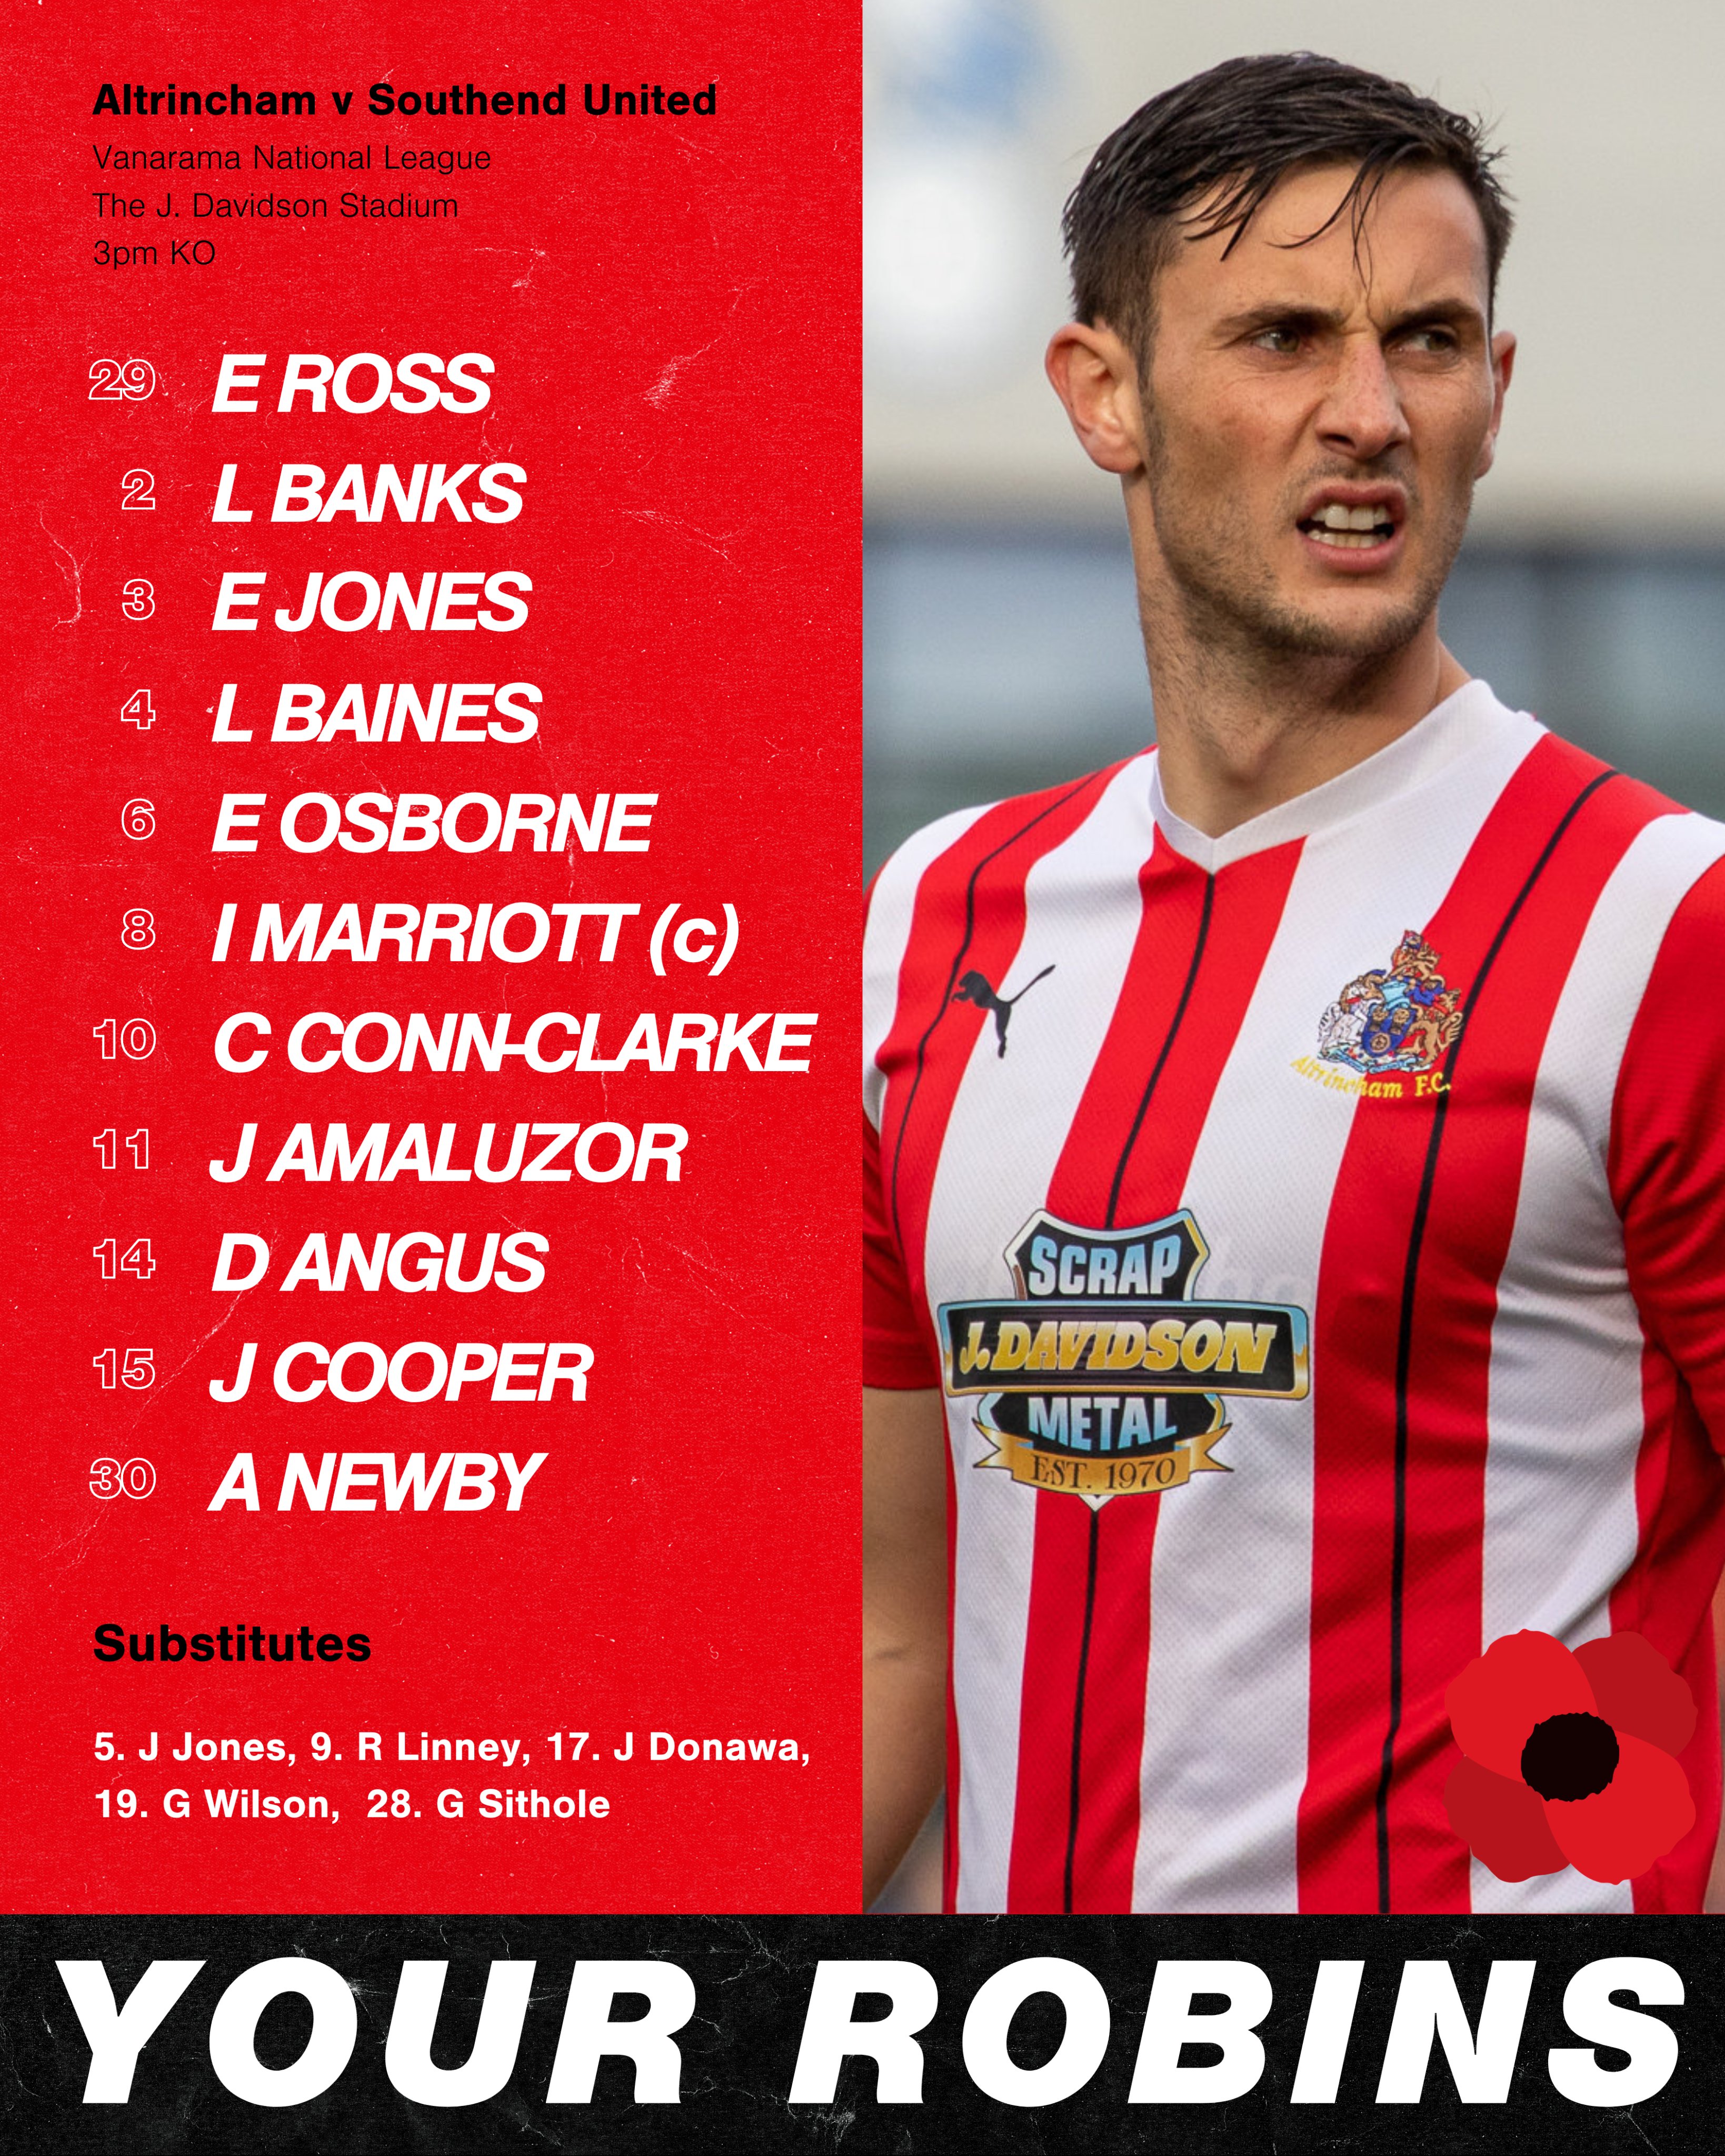 Altrincham FC on X: 📝 Here's how we are lining up for this afternoon's  game at The @JDavidsonScrap Stadium ⤵️ A return to the bench for  @ReganLinney1 and @George_Wilson10 after spells out